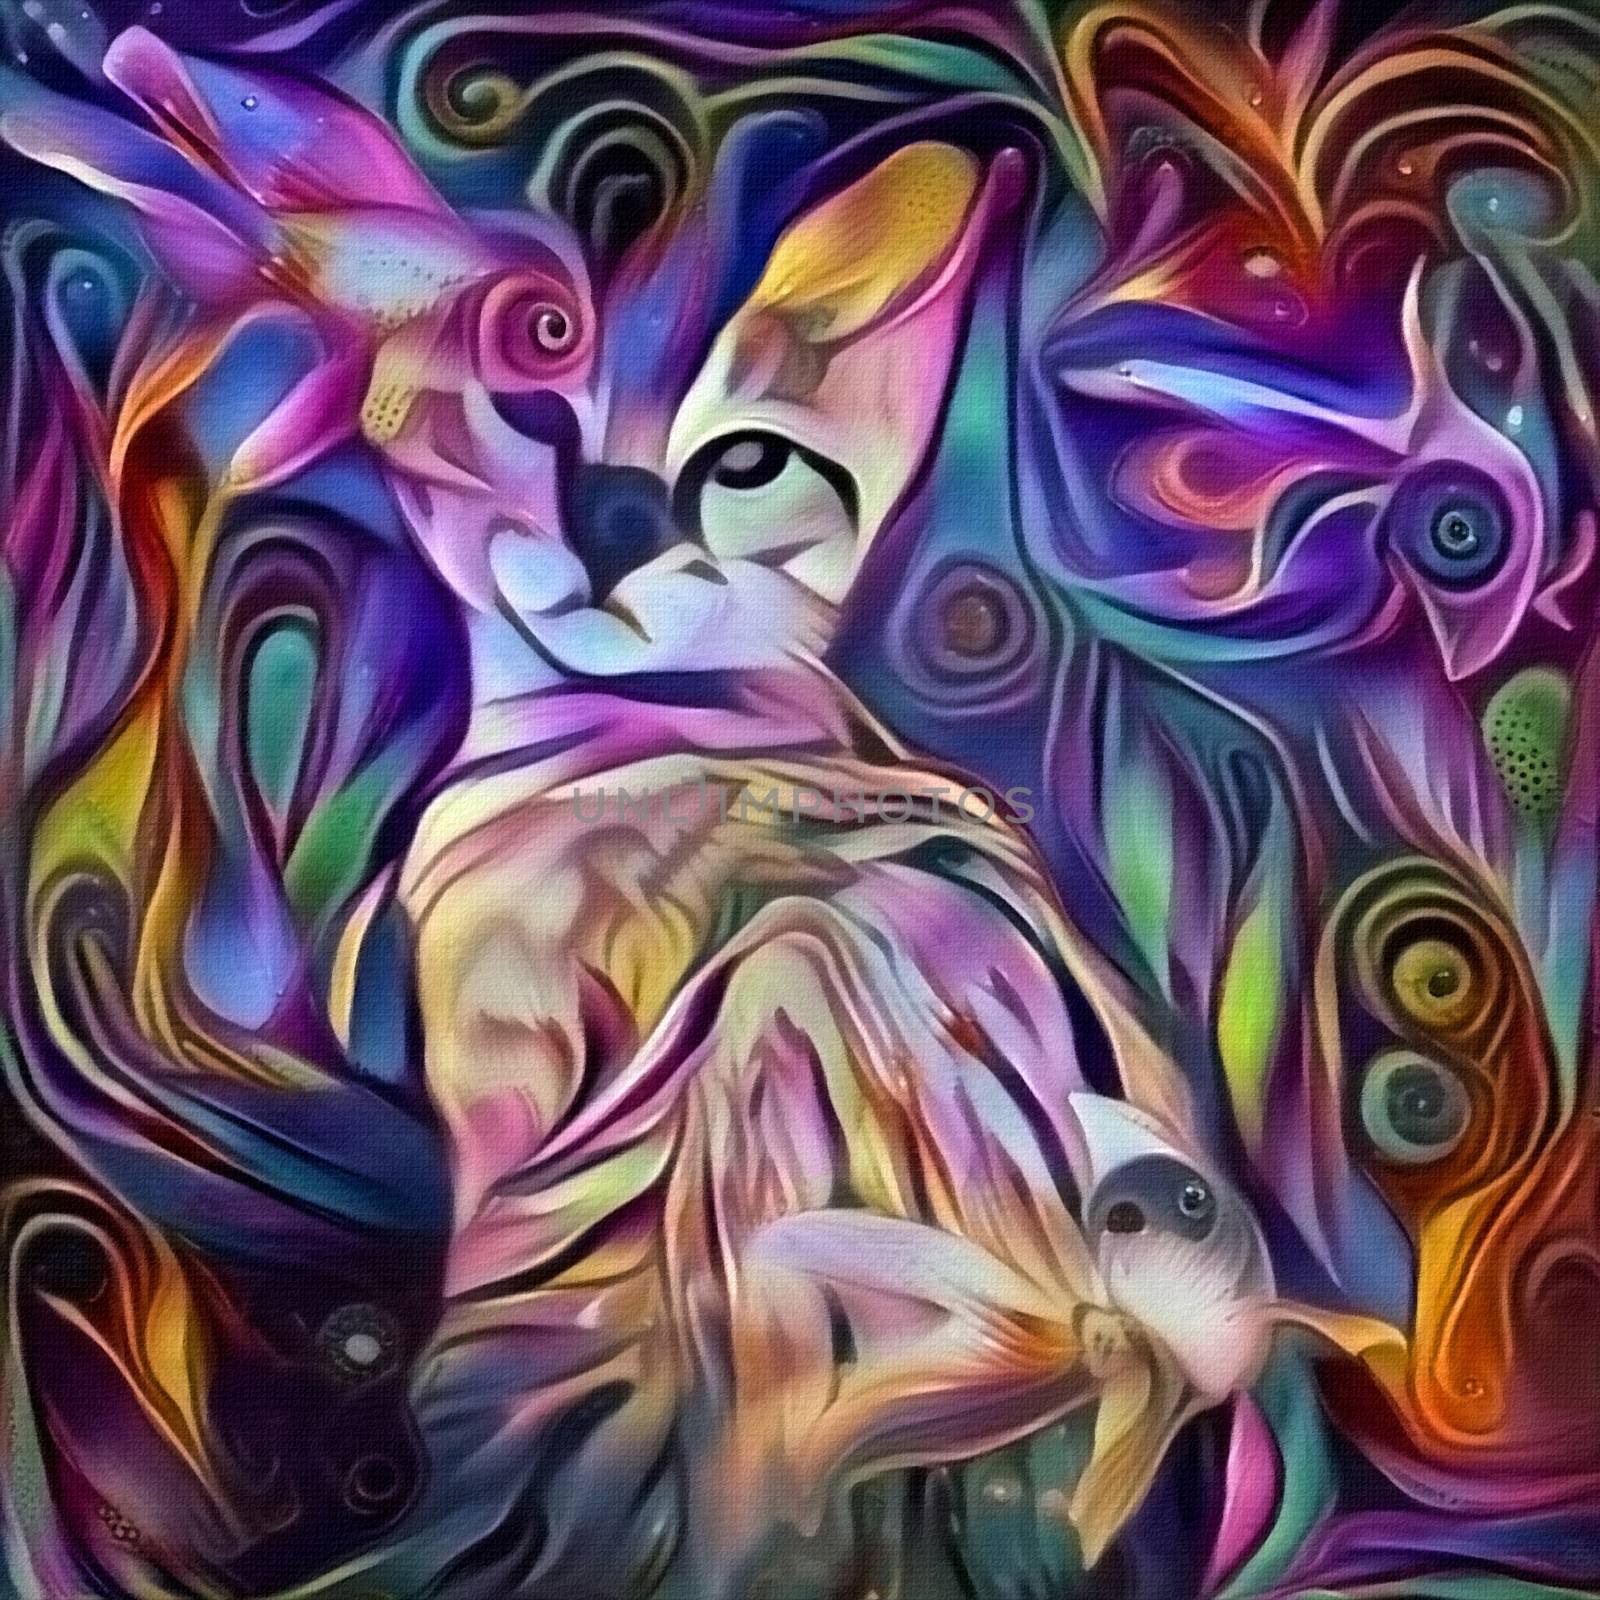 Modern painting in vivid colors. Kitty cat and colorful fish